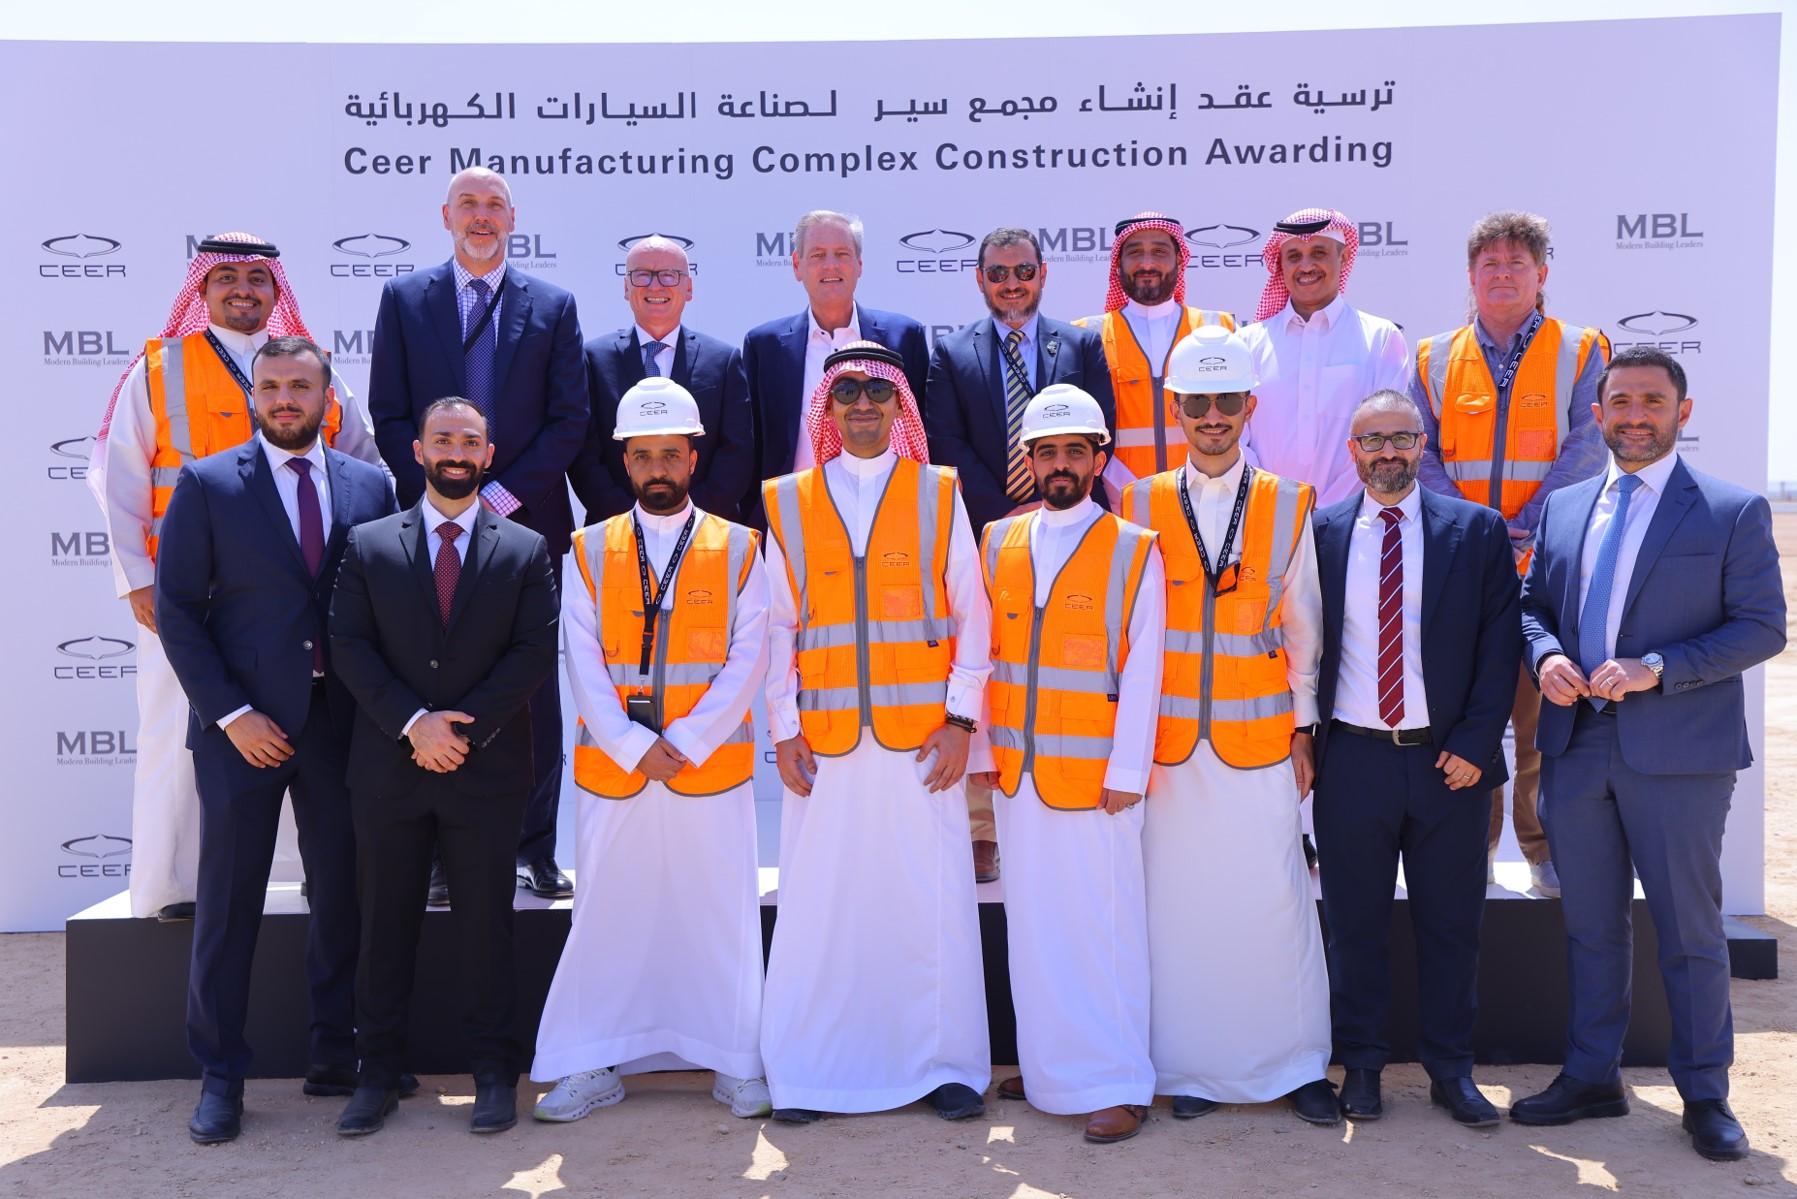 Ceer Manufacturing Construction Awarding Signing Ceremony 